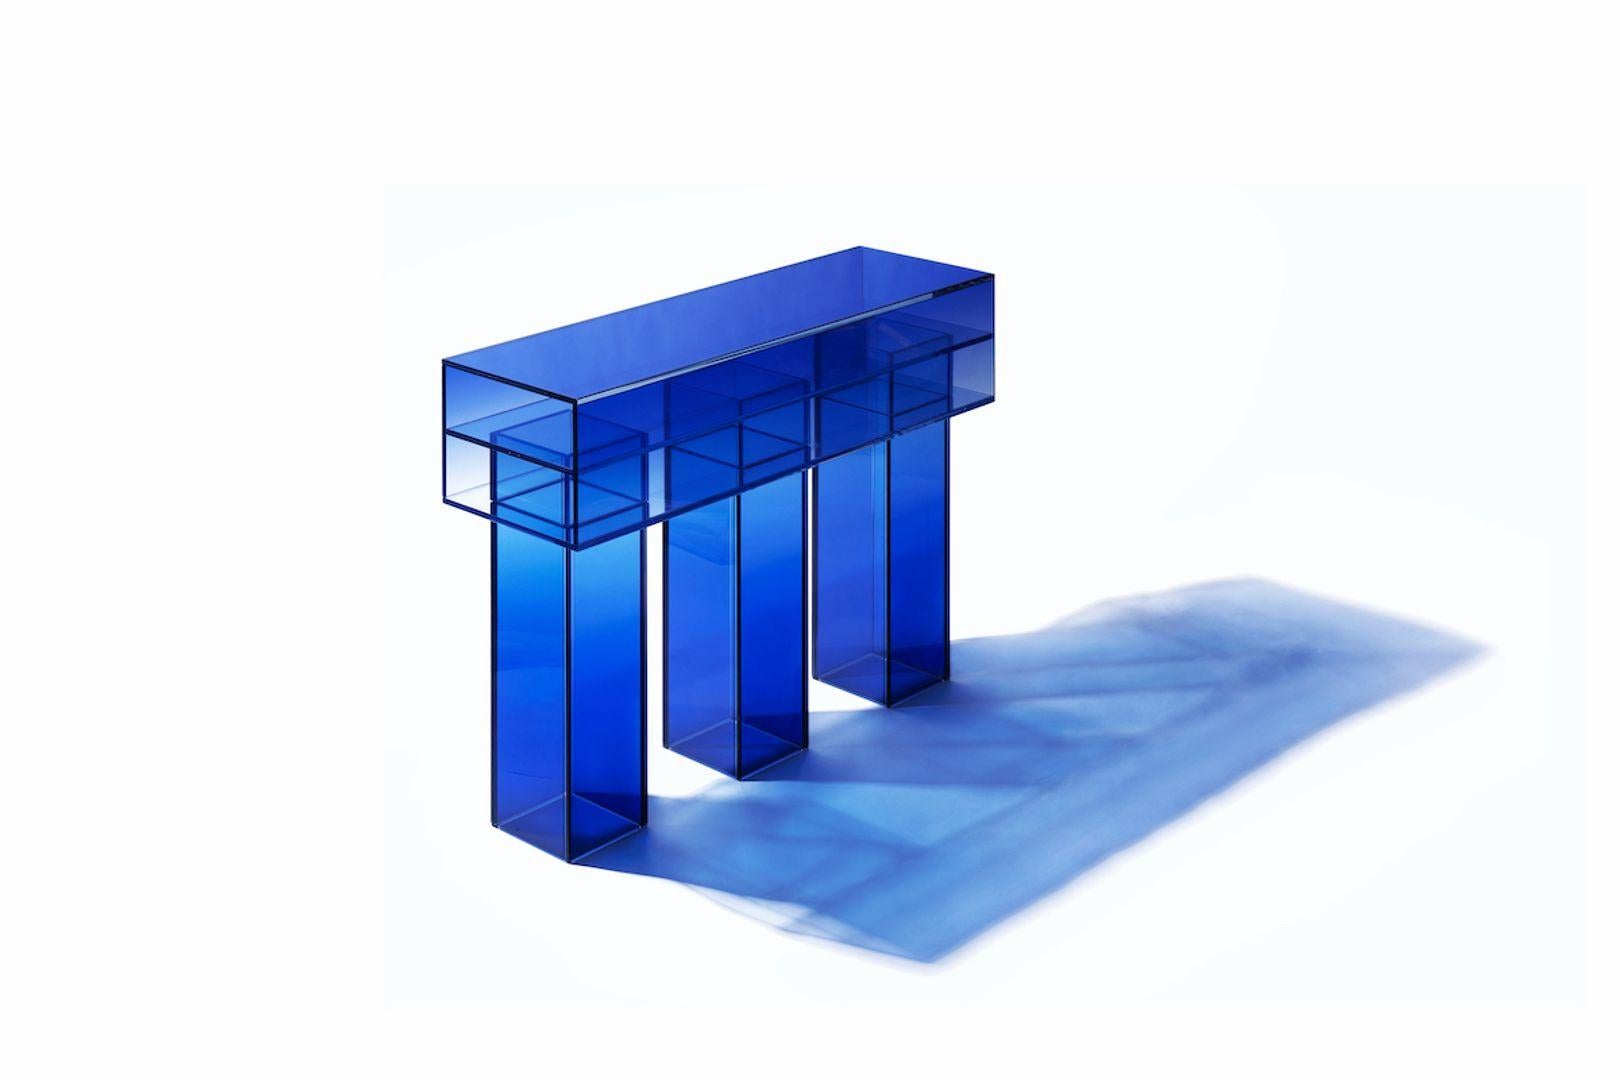 This dining table is made of laminated glass in blue color. Size and color are customizable upon request.

Studio Buzao is an experimental design studio. It tempts to breakthrough the difference between product and artwork by immersing the